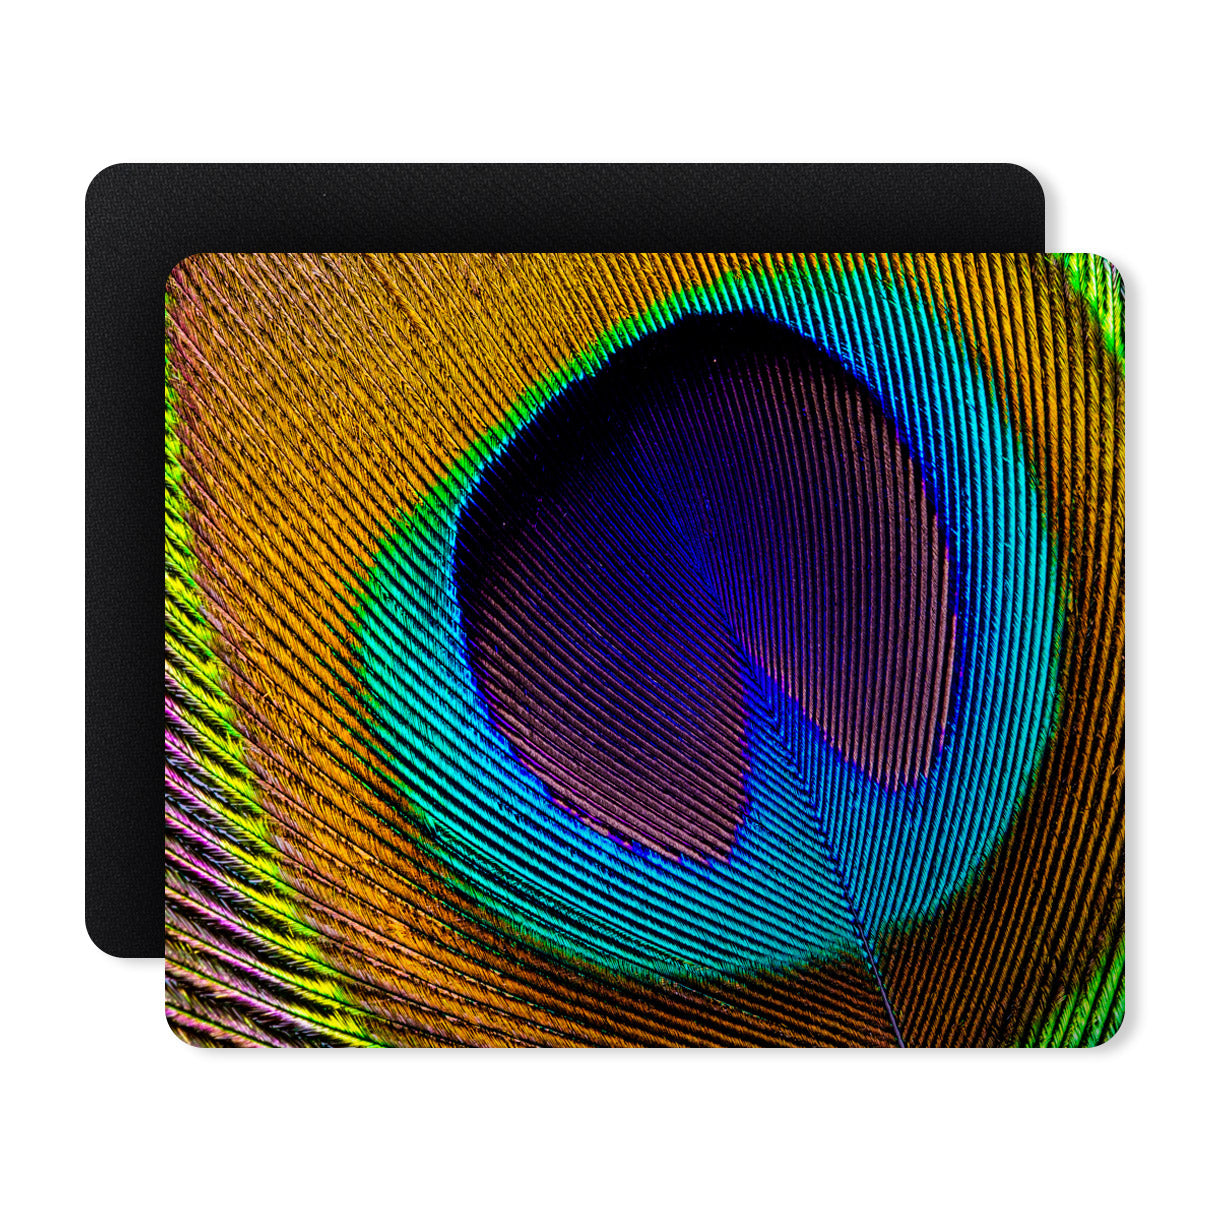 Peacock Feather Background Designer Printed Premium Mouse pad (9 in x 7.5 in)